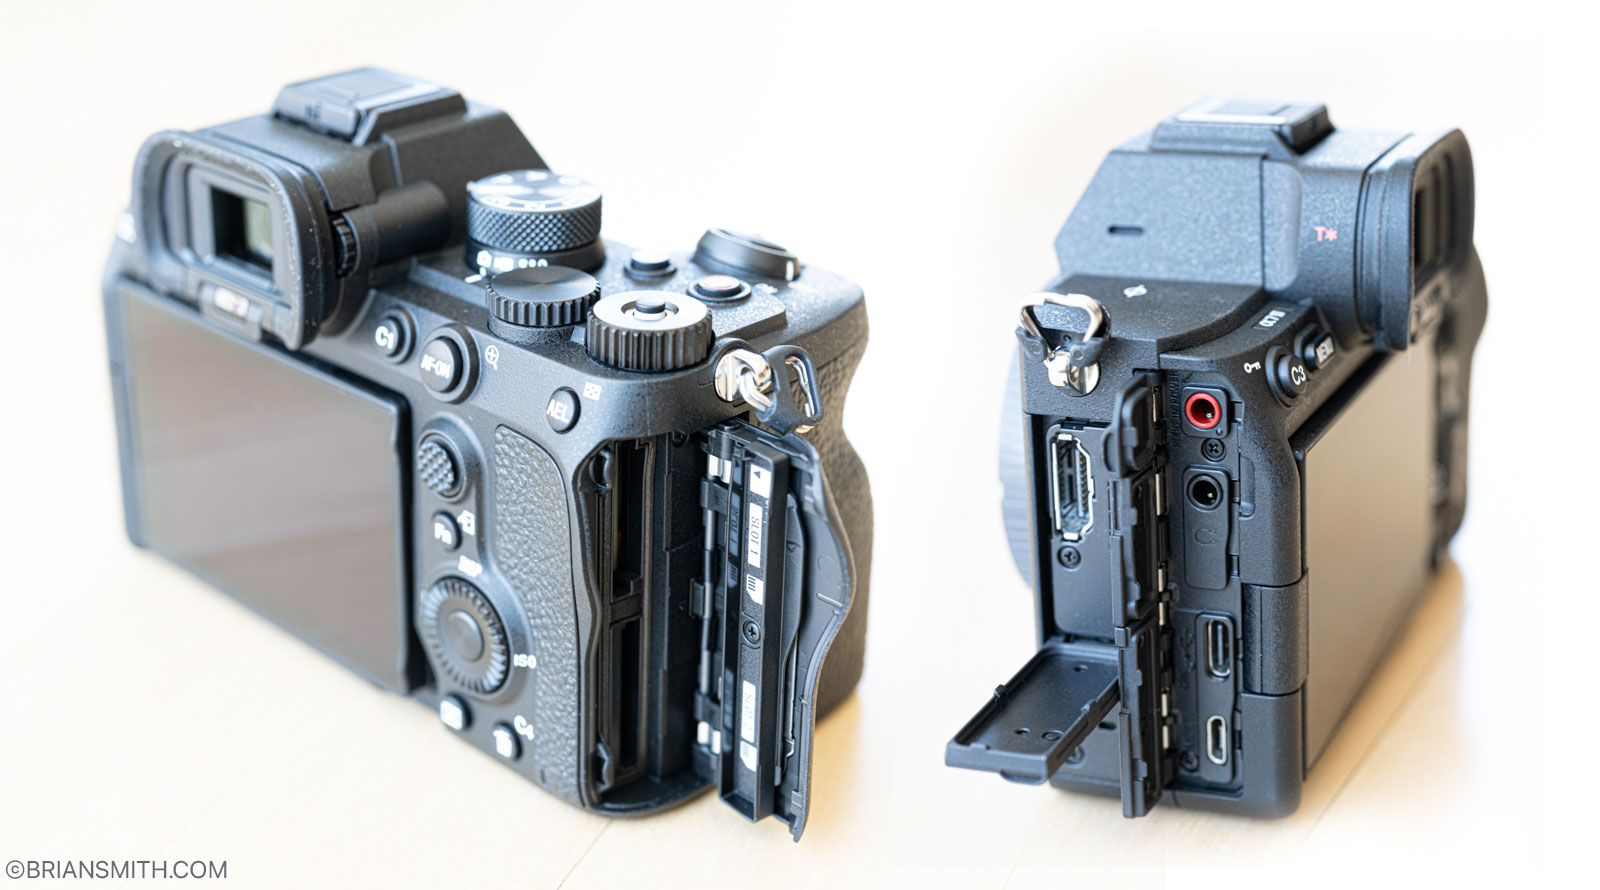 Sony a7IV memory card slots and ports